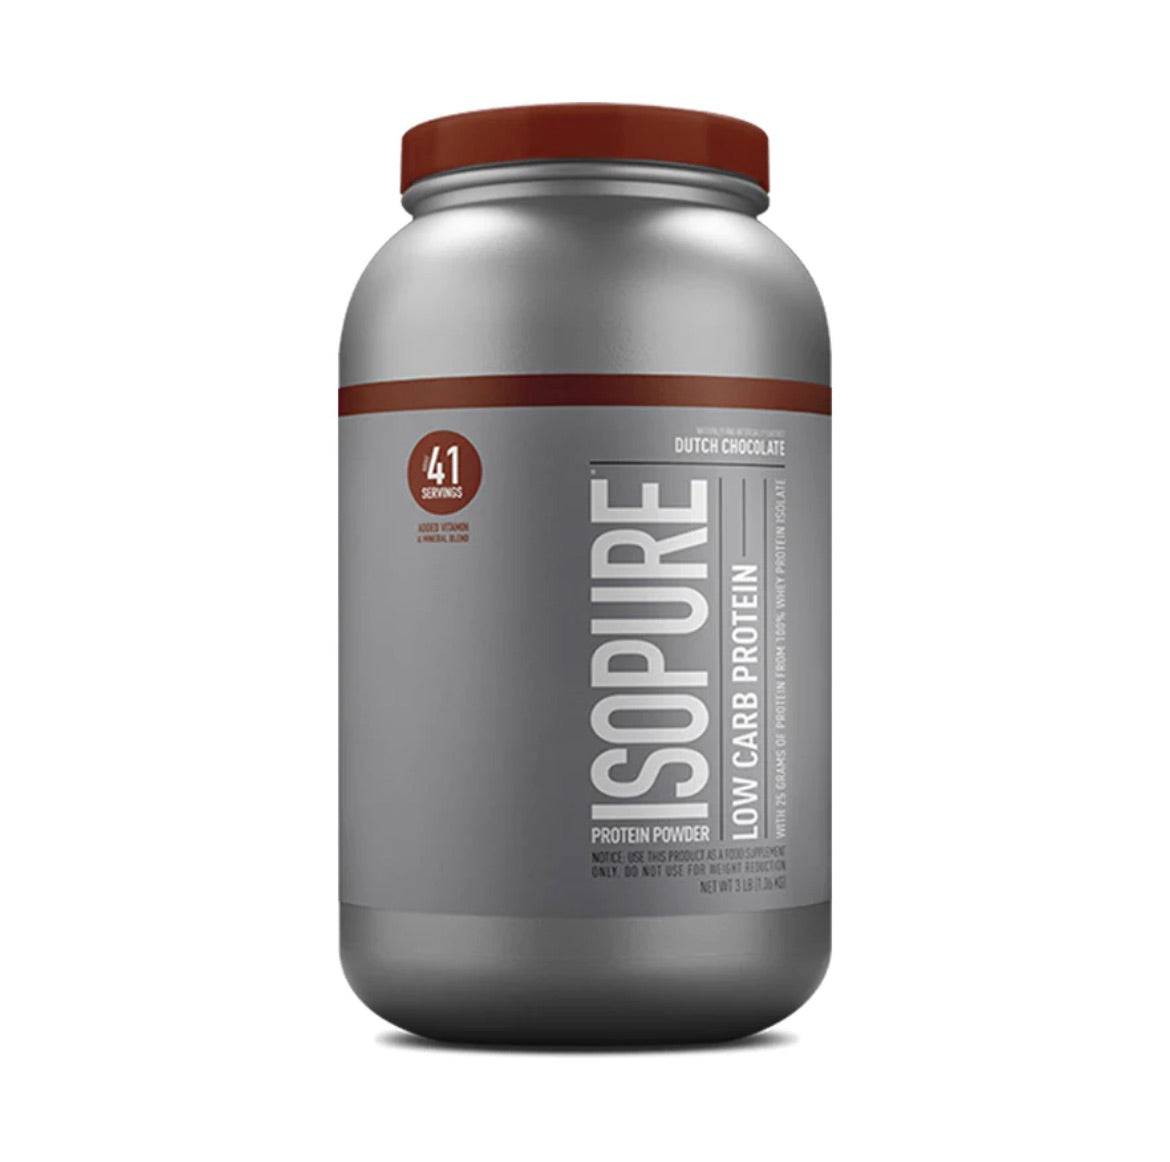 Shop Dymatize ISO100 Whey Protein Isolate Online l Campus Protein